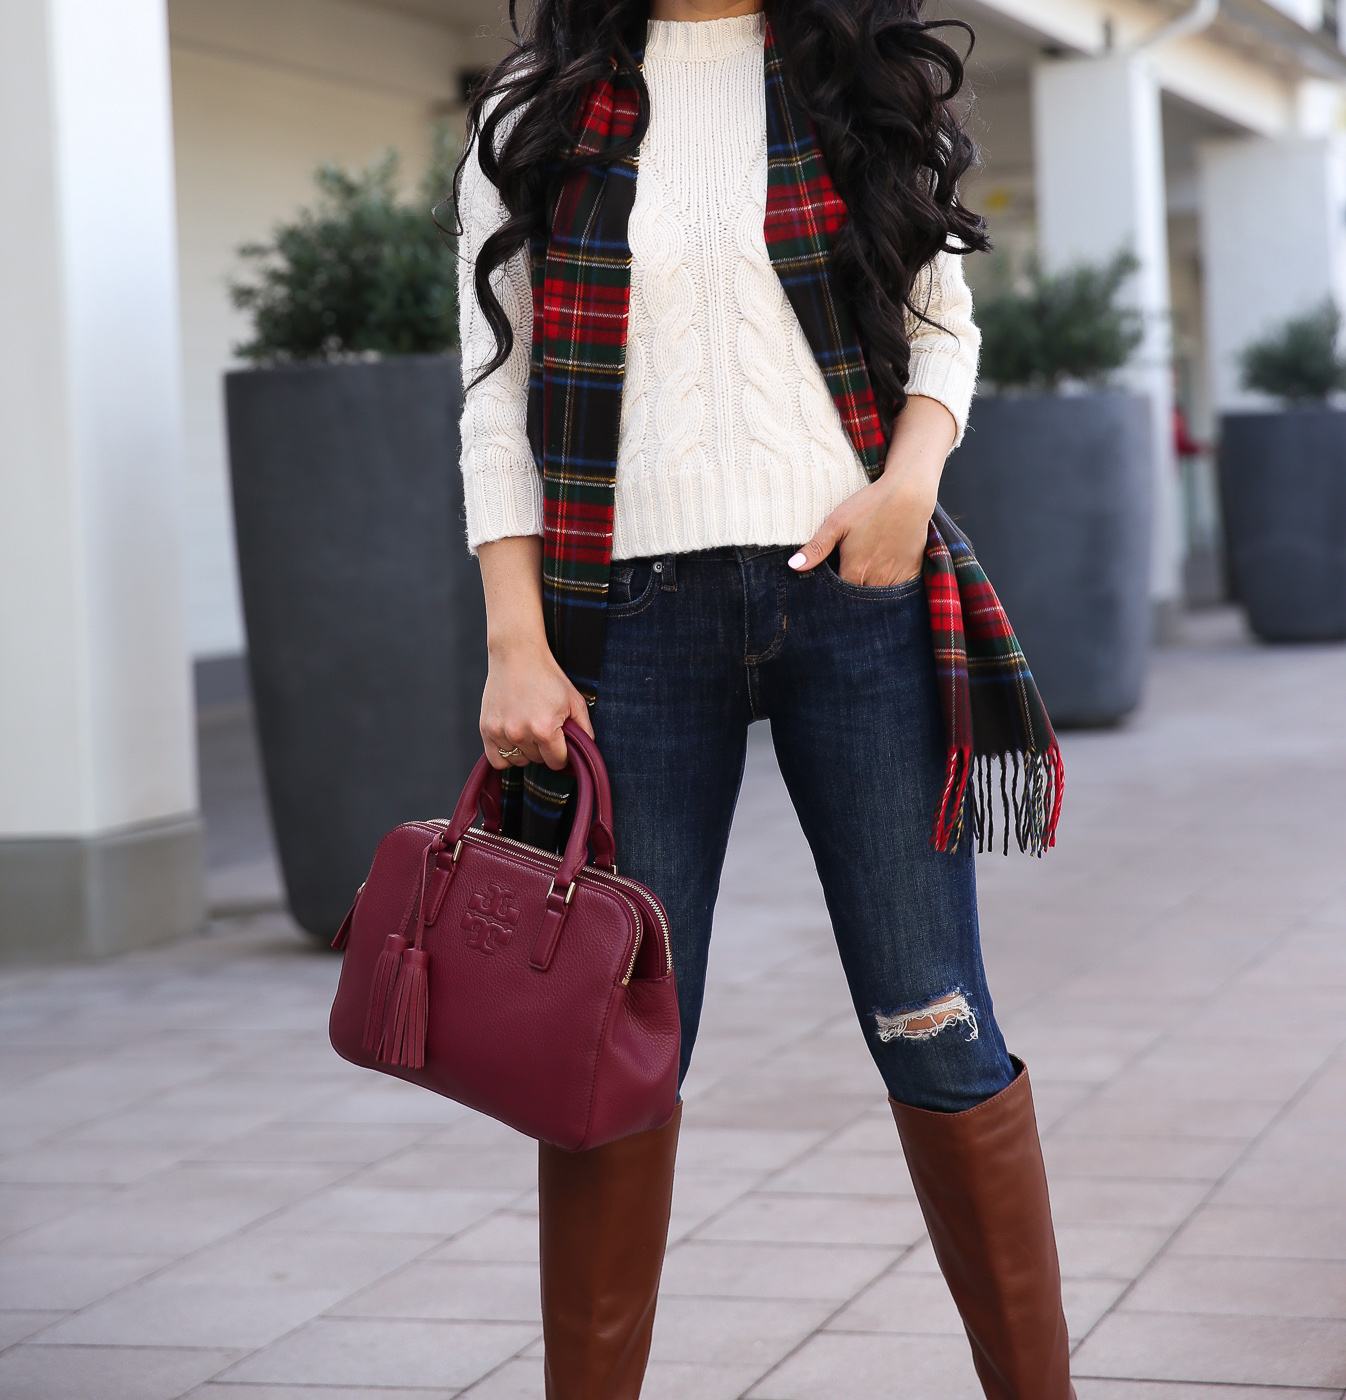 Winter holiday outfit plaid scarf cognac boots chunky sweate